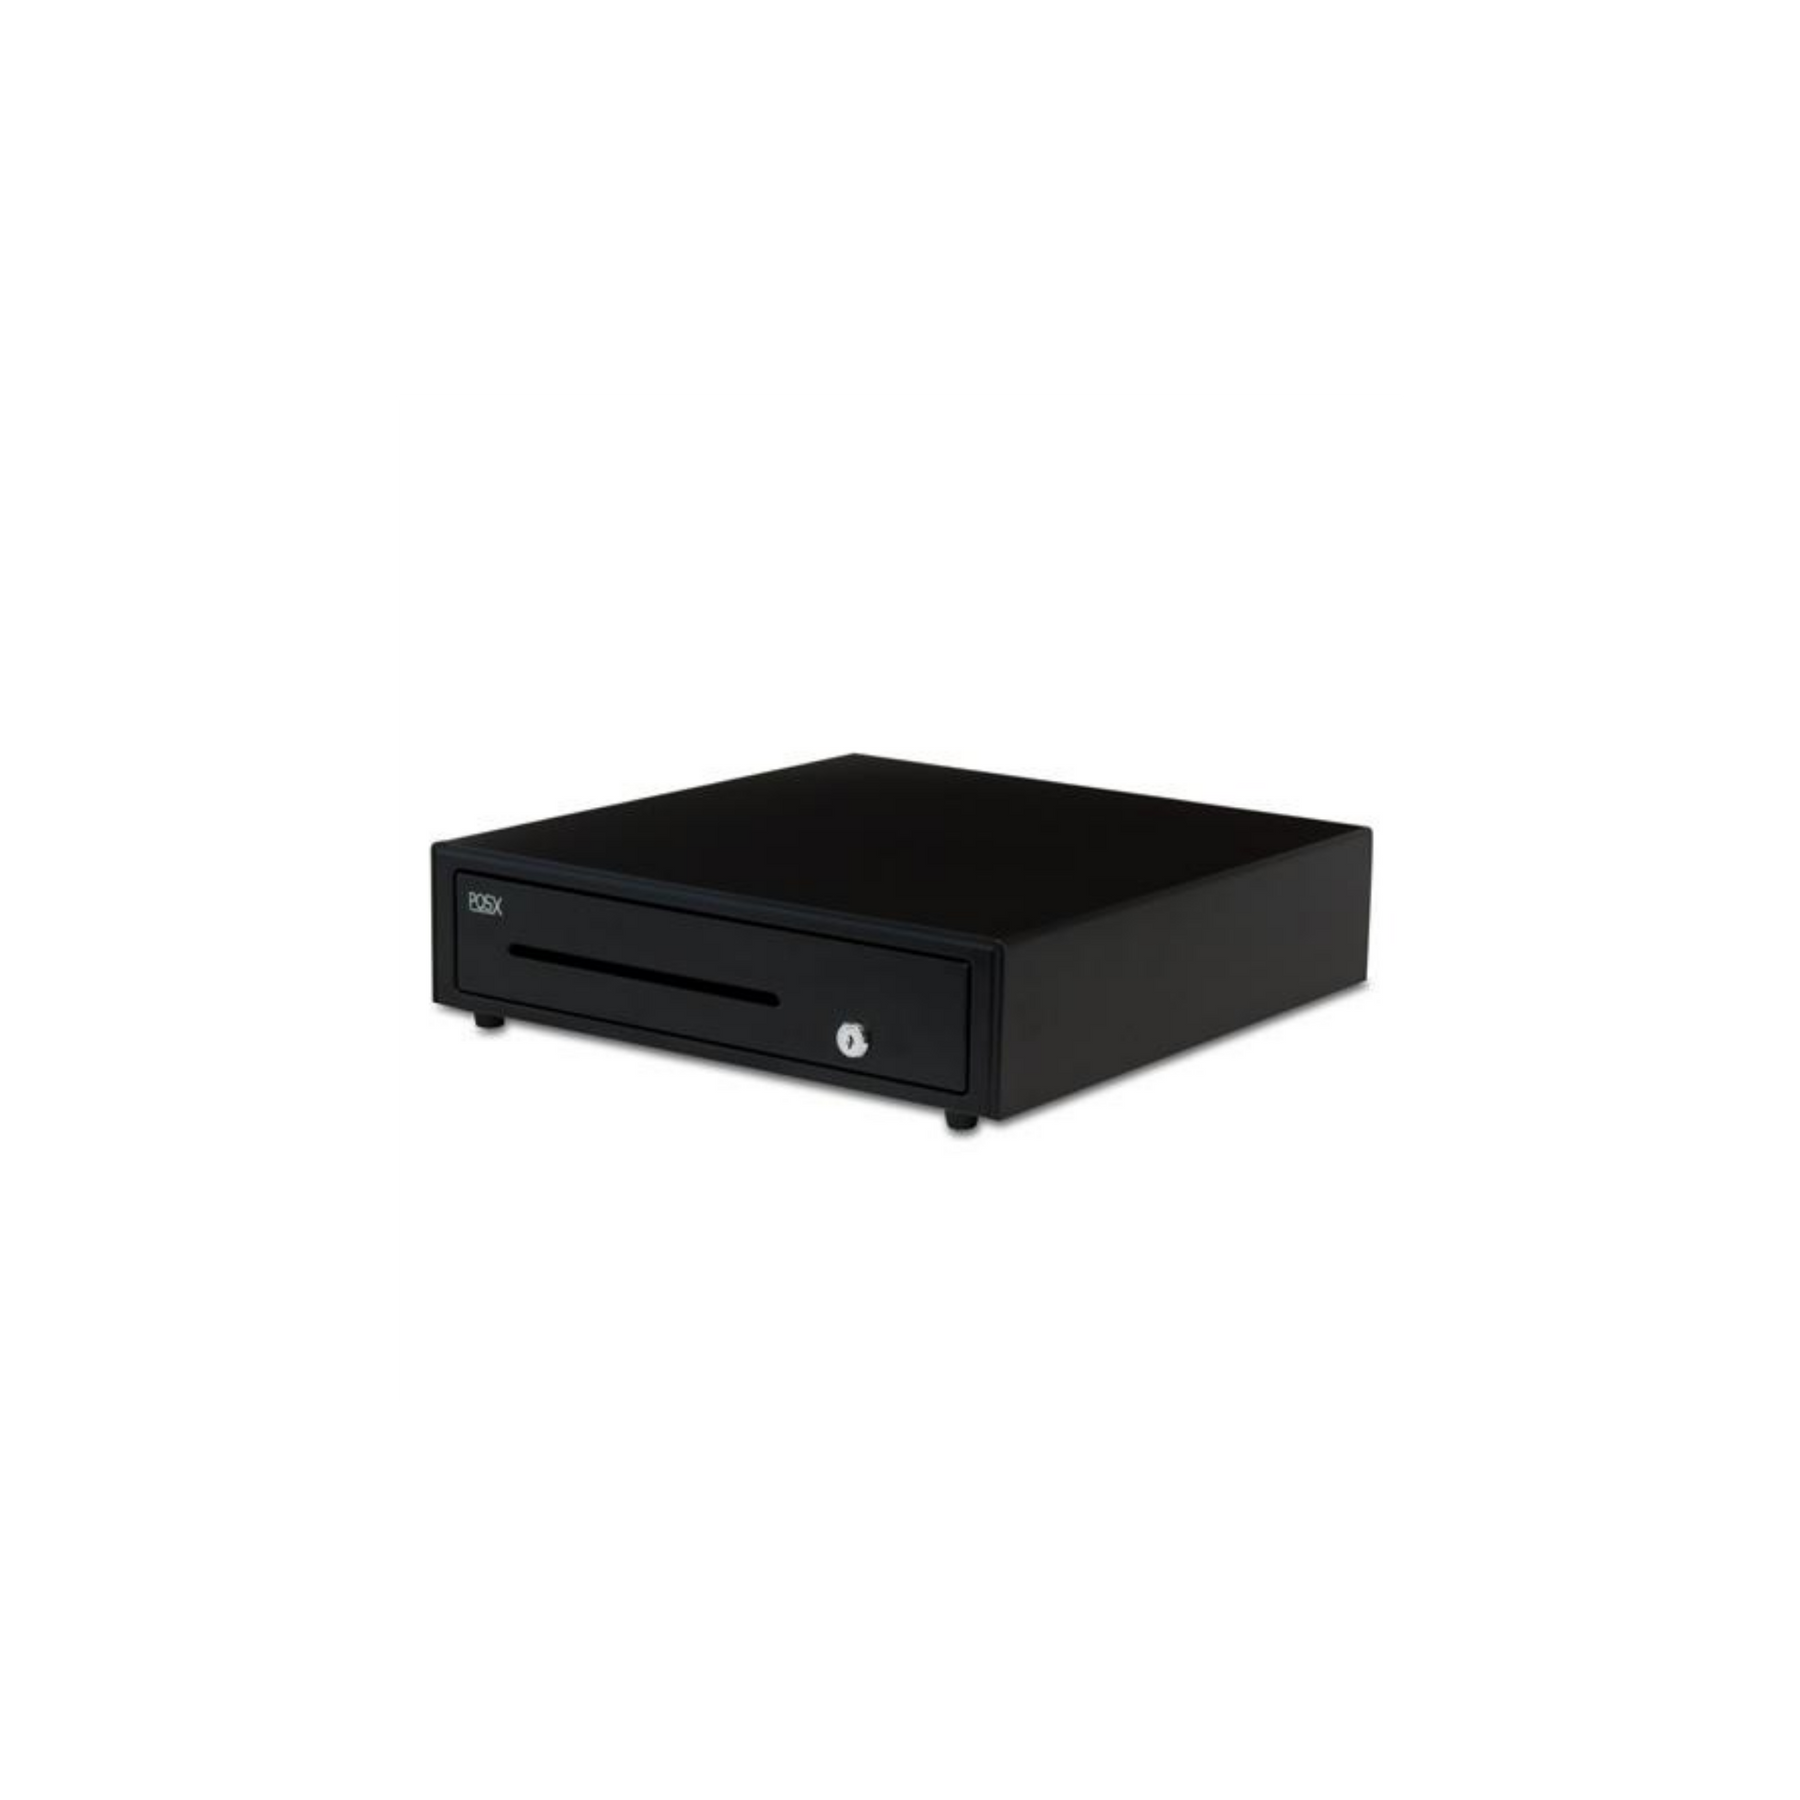 POS-X ION Cash Drawer, 16X16 Black Front with Printer Cable (Optional for PC, Mac and iPad)